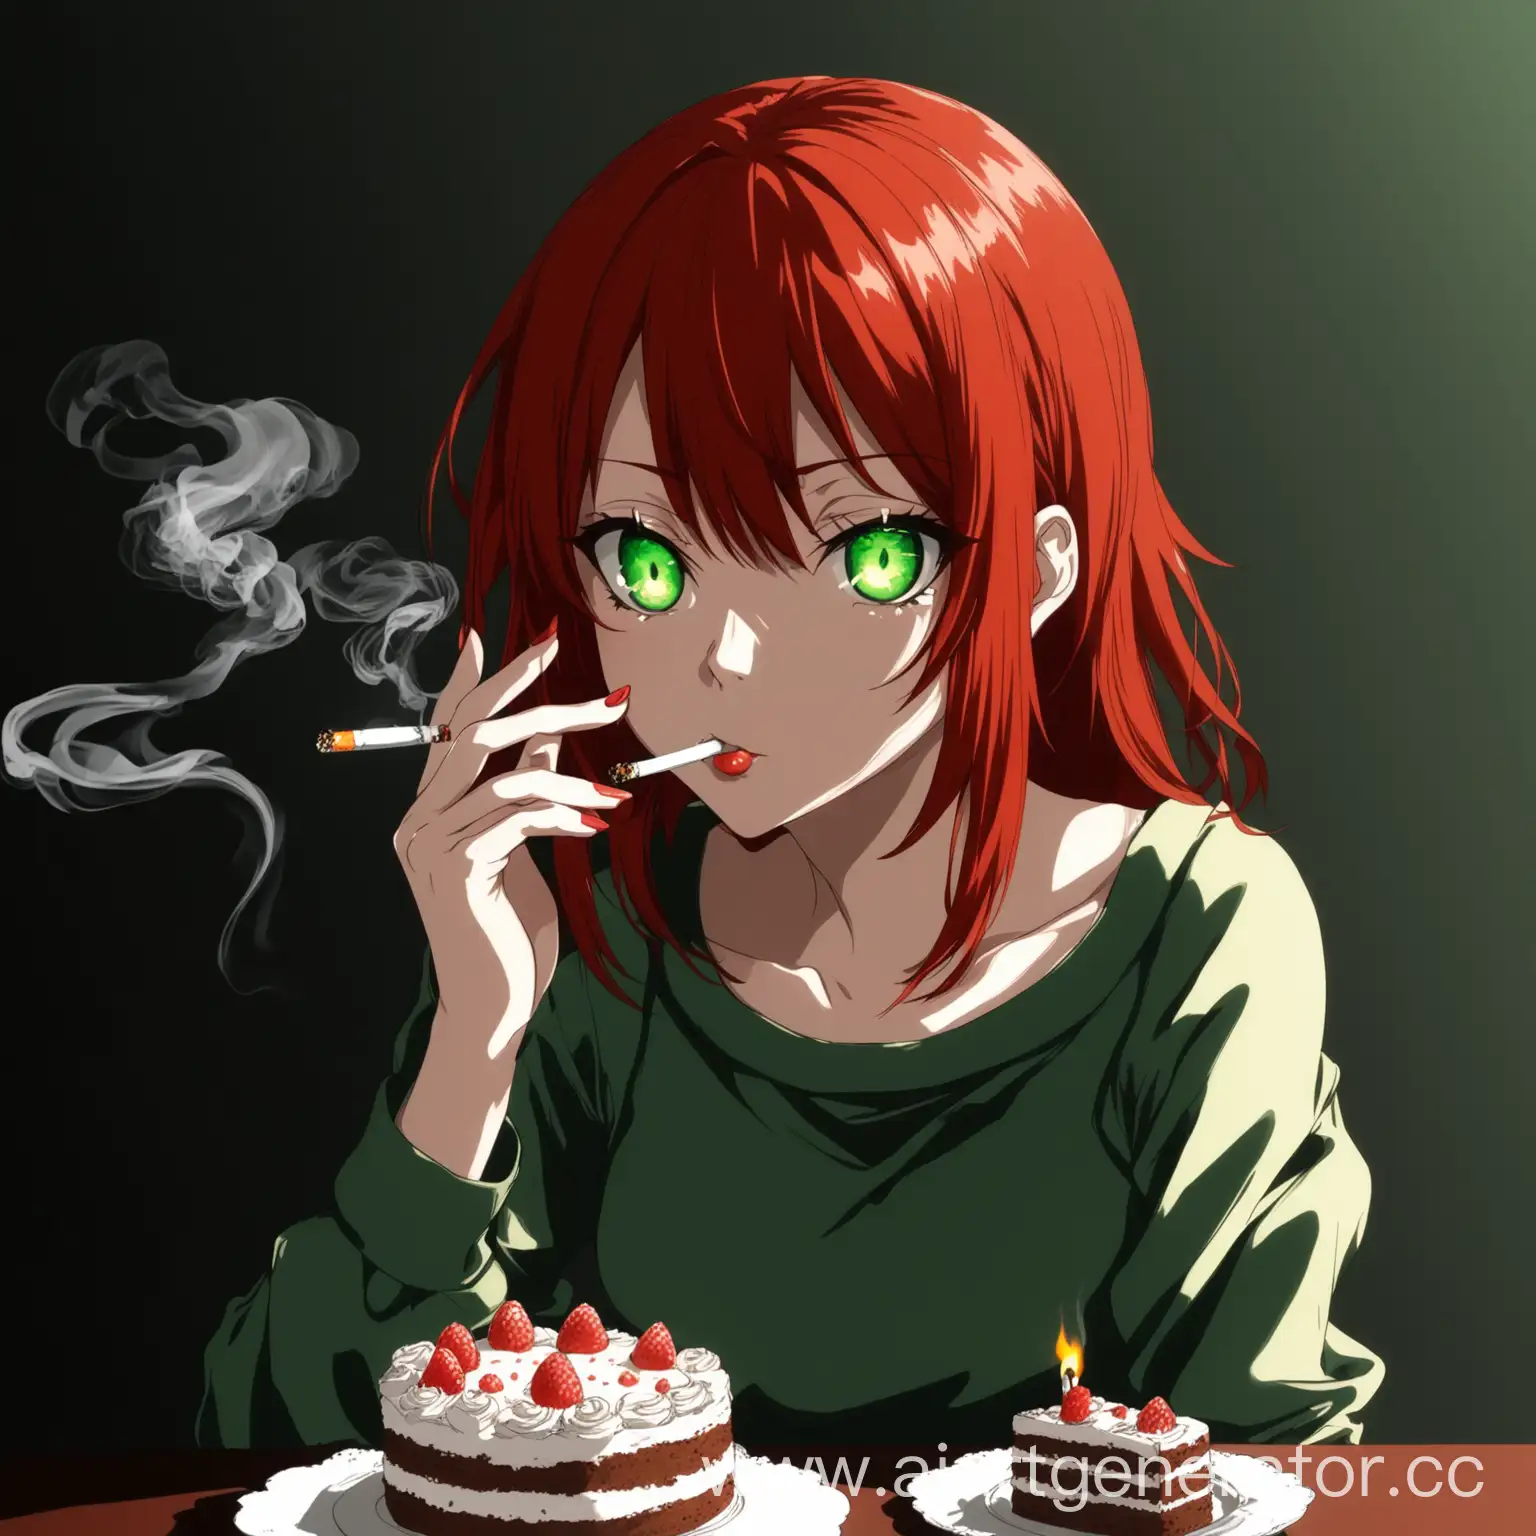 Anime-Girl-with-Cake-and-Cigarette-Red-Hair-and-Green-Eyes